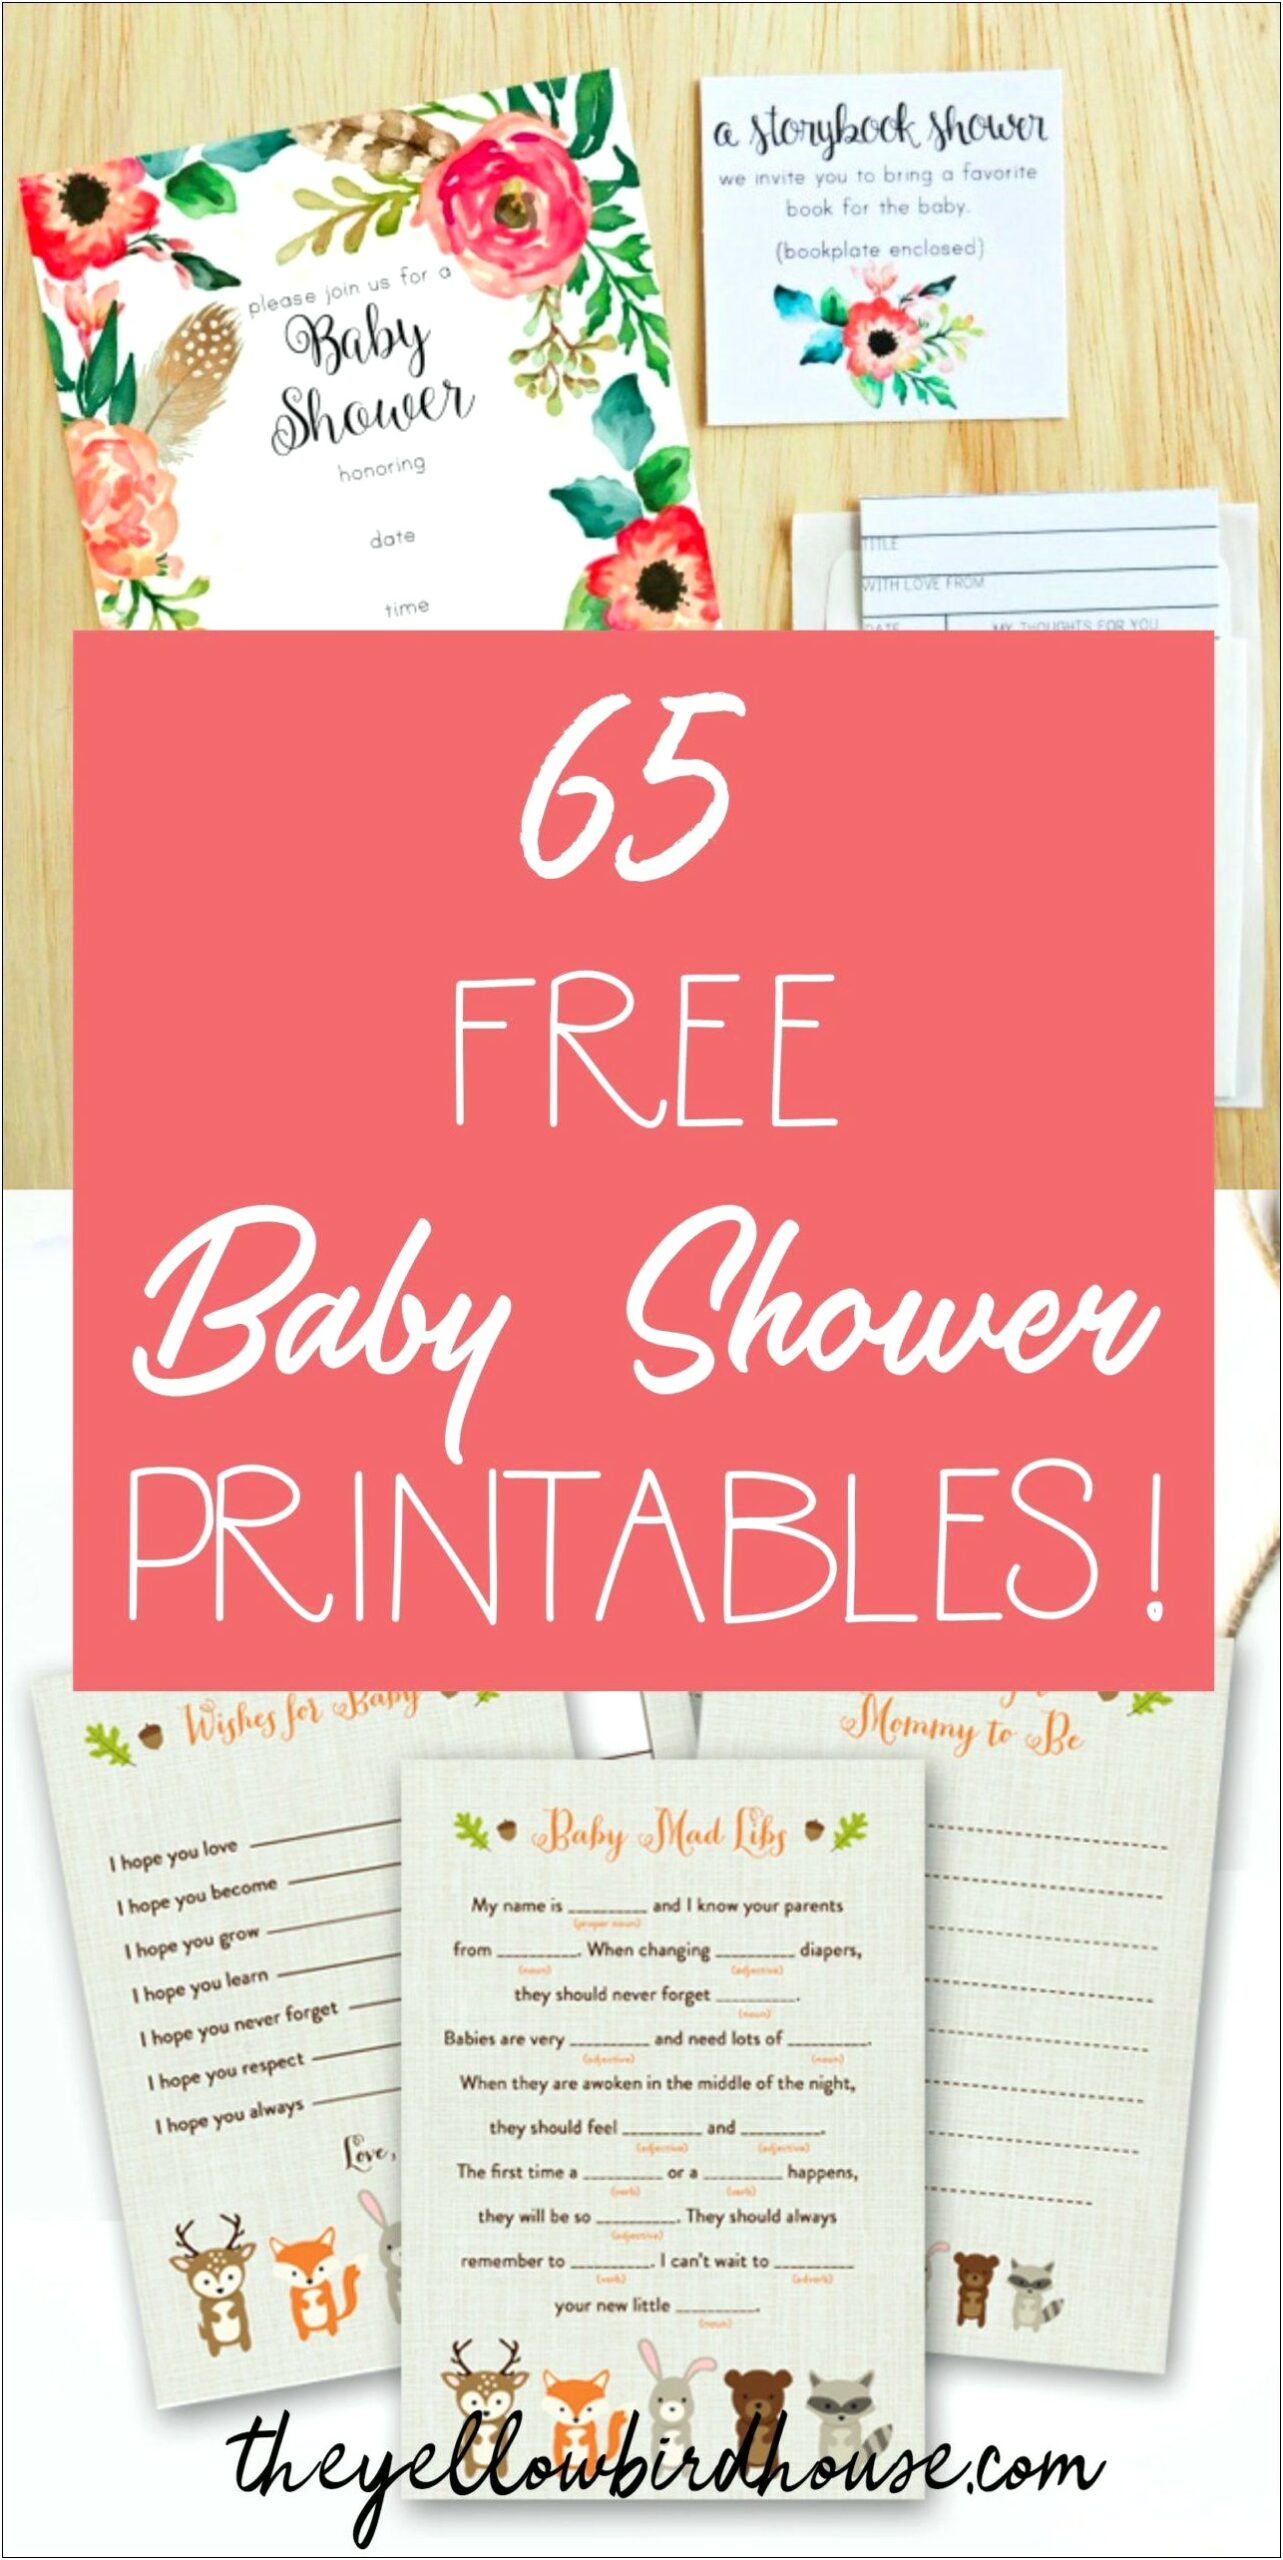 Baby Diaper Raffle Tickets Free Template